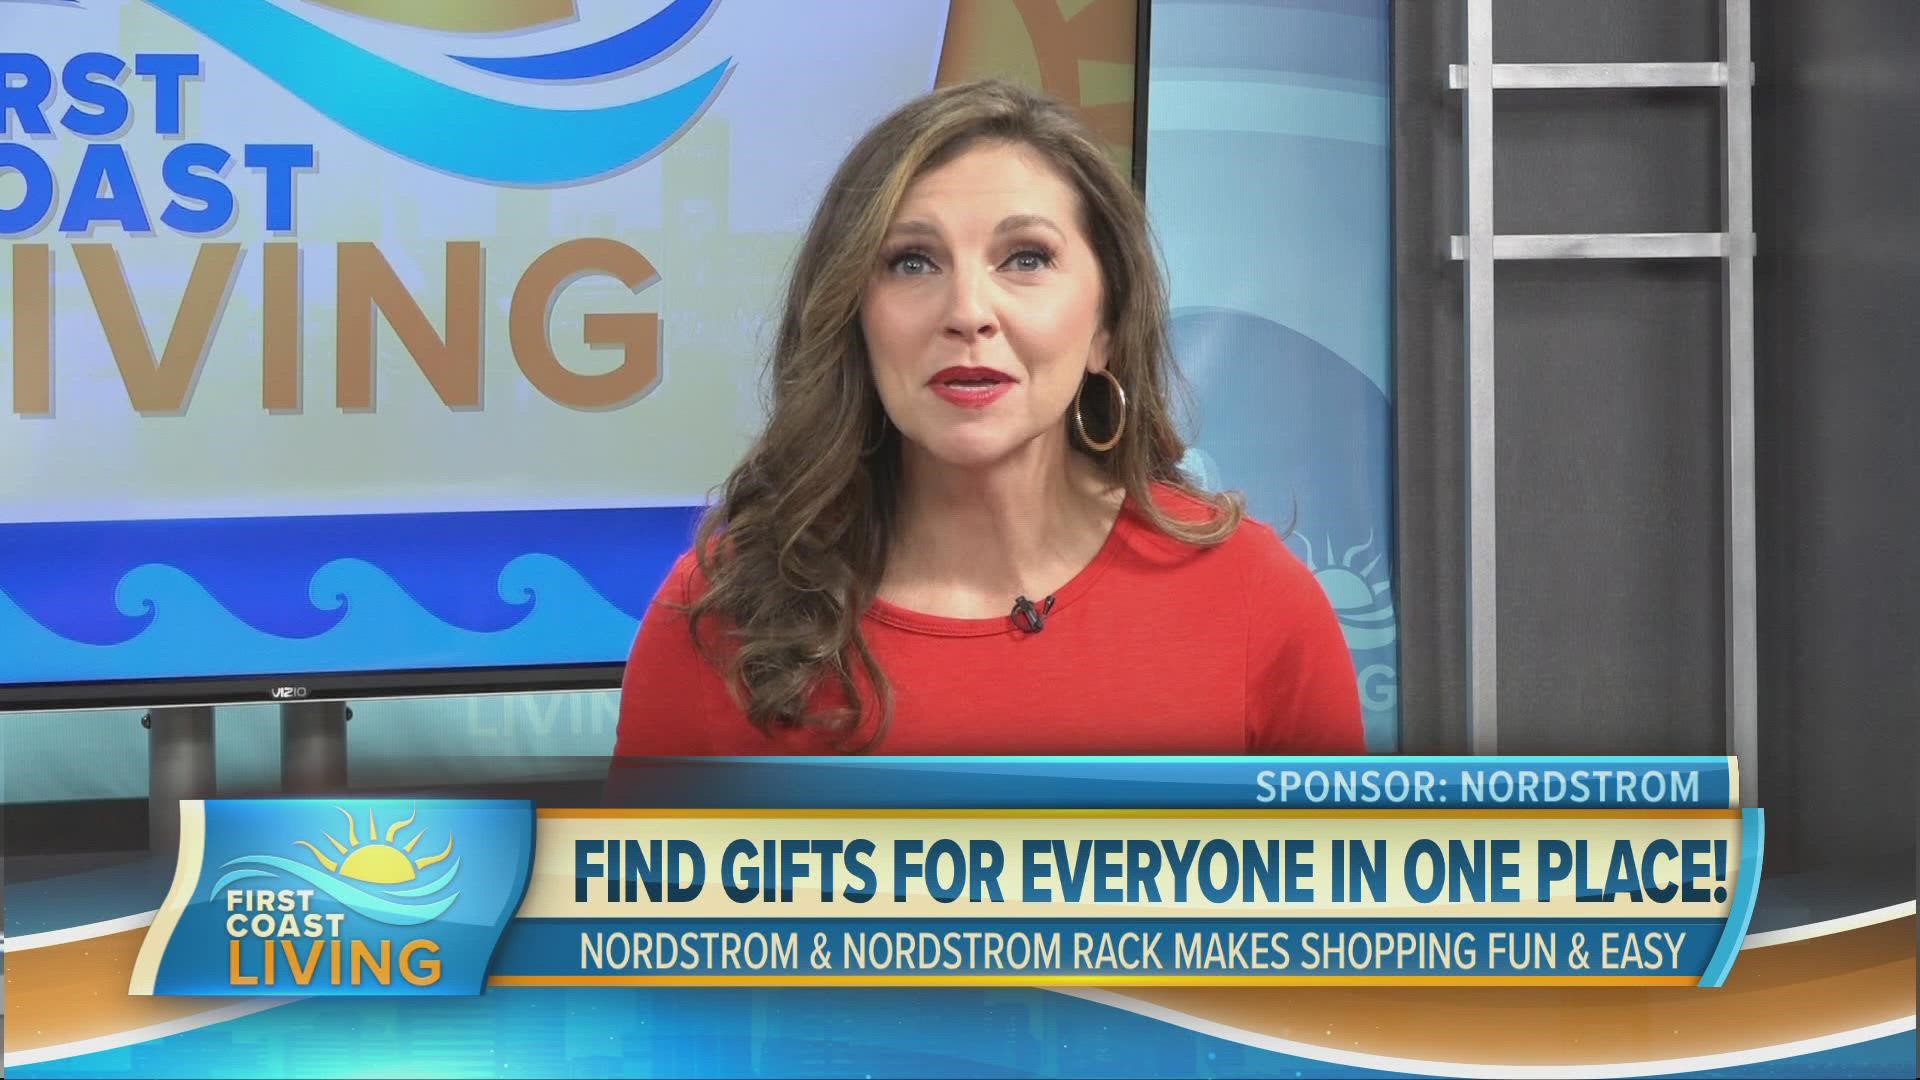 Kate Bellman, Nordstrom Senior Managing Fashion Editor, shares some insider tips for in-store and online holiday shopping this season.